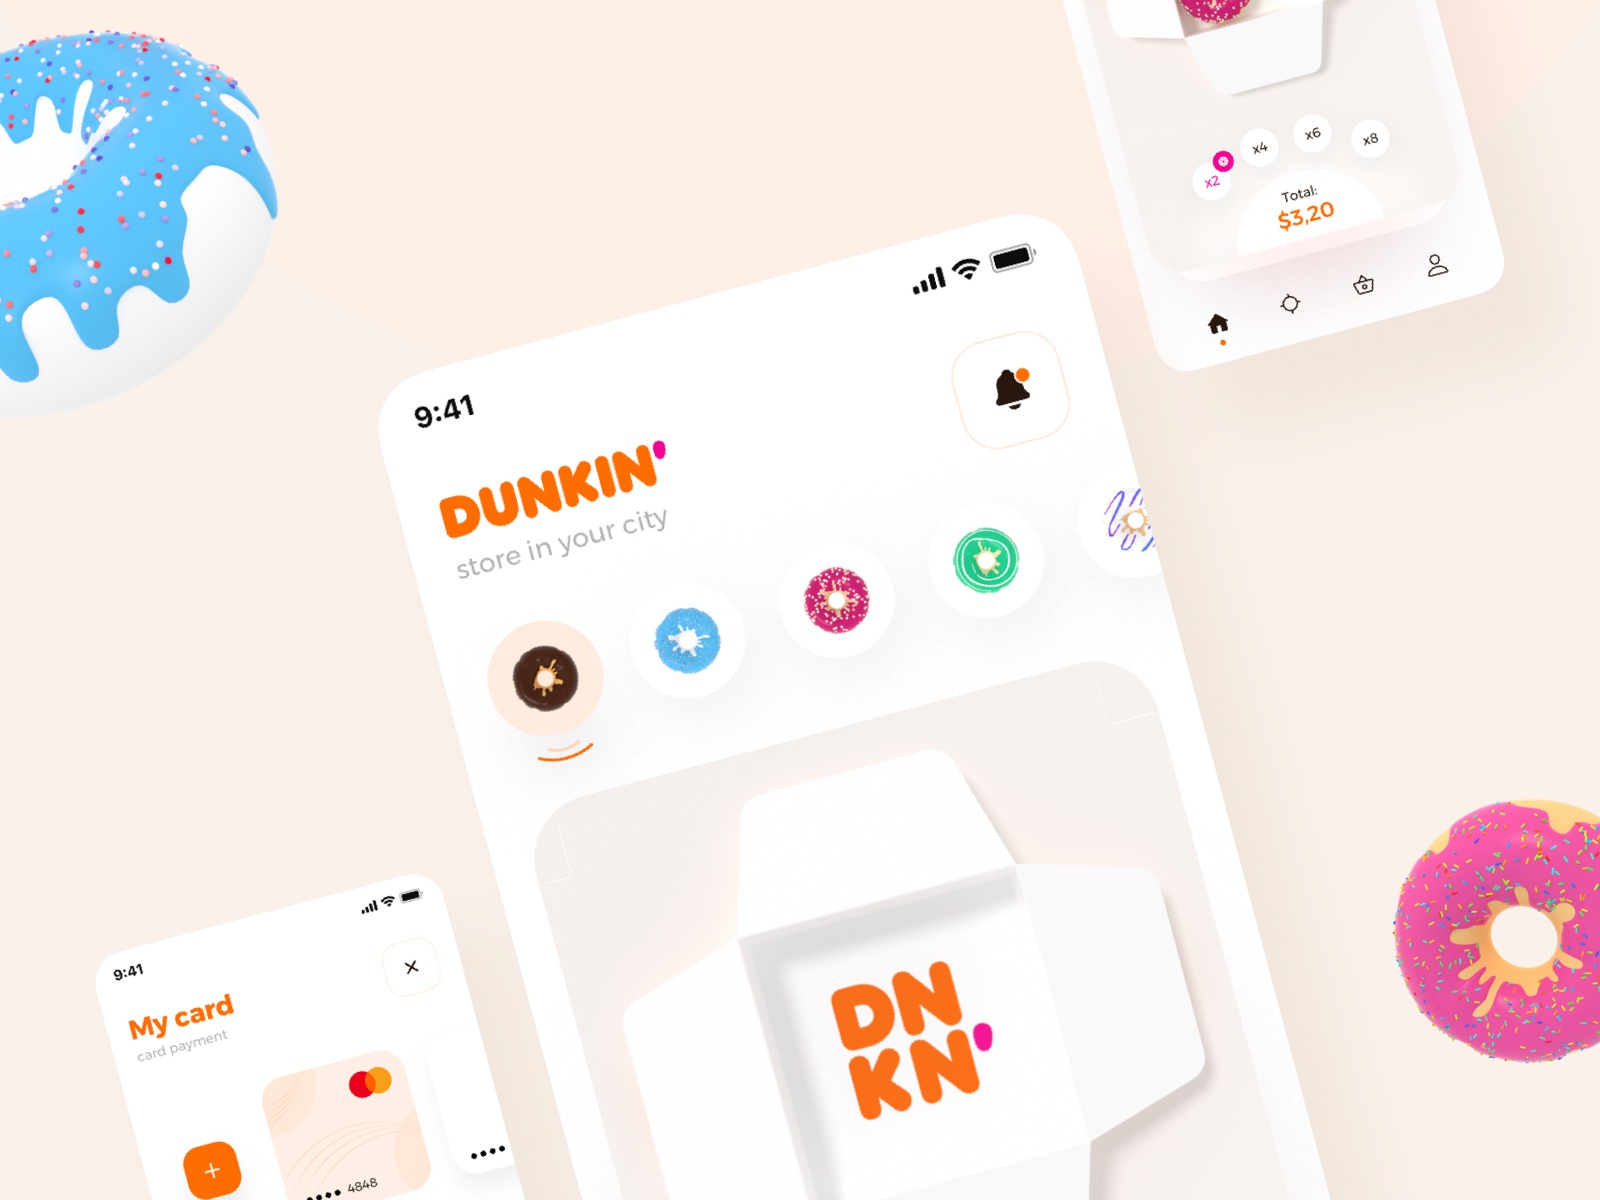 The Dunkin Donuts 3d interaction design